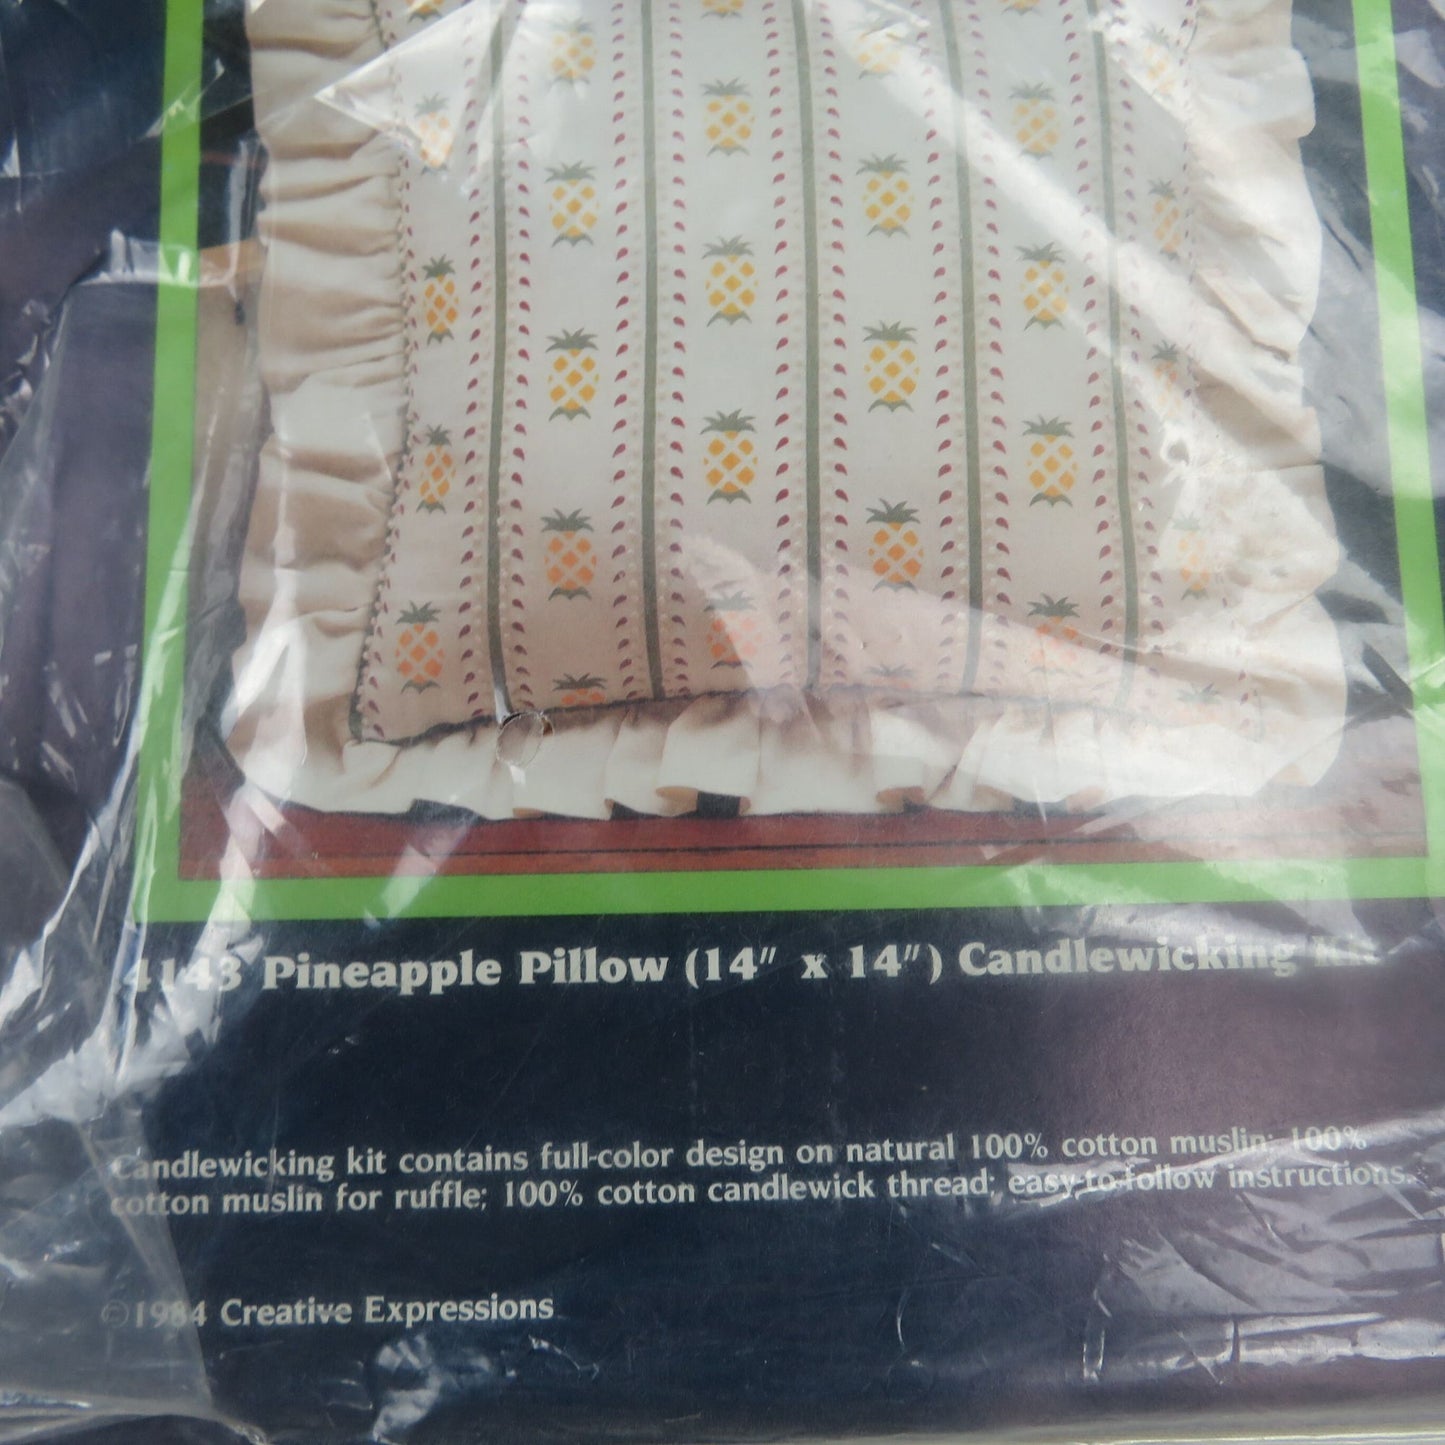 Candlewicking Pineapple Pillow Kit Embroidery Creative Expressions 1984